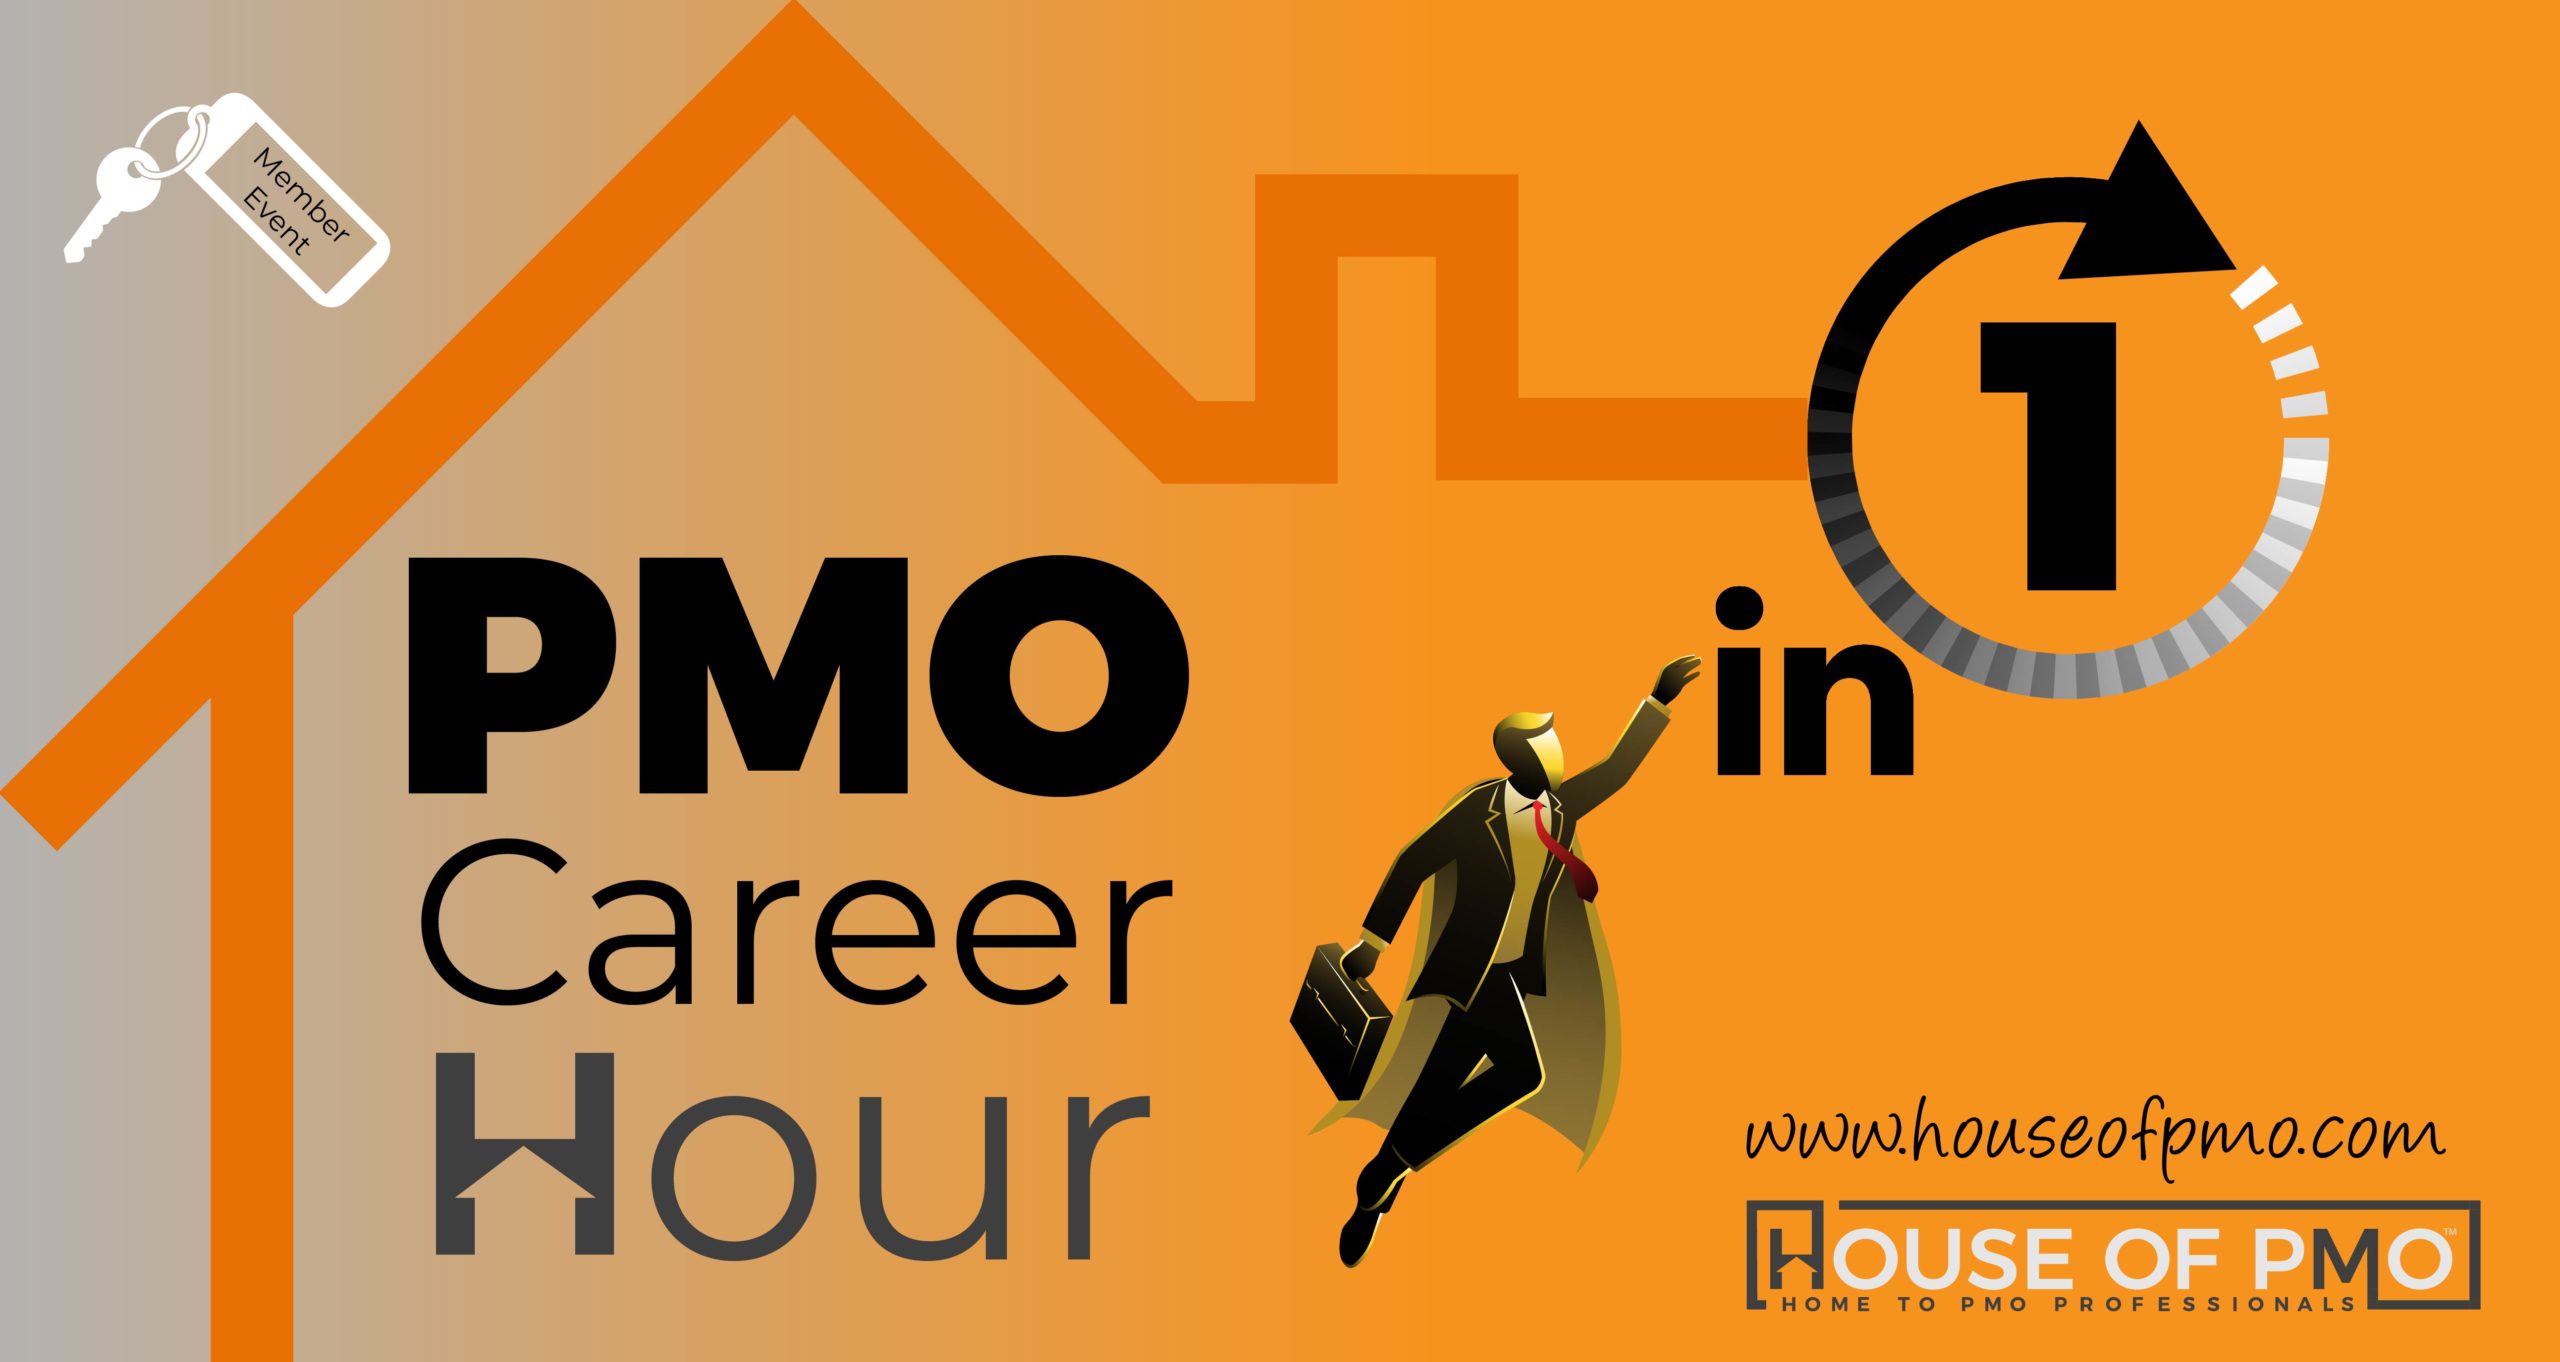 Image of a super hero dressed as a business man to advertise the PMO Career hour event power up your profile on linkedin